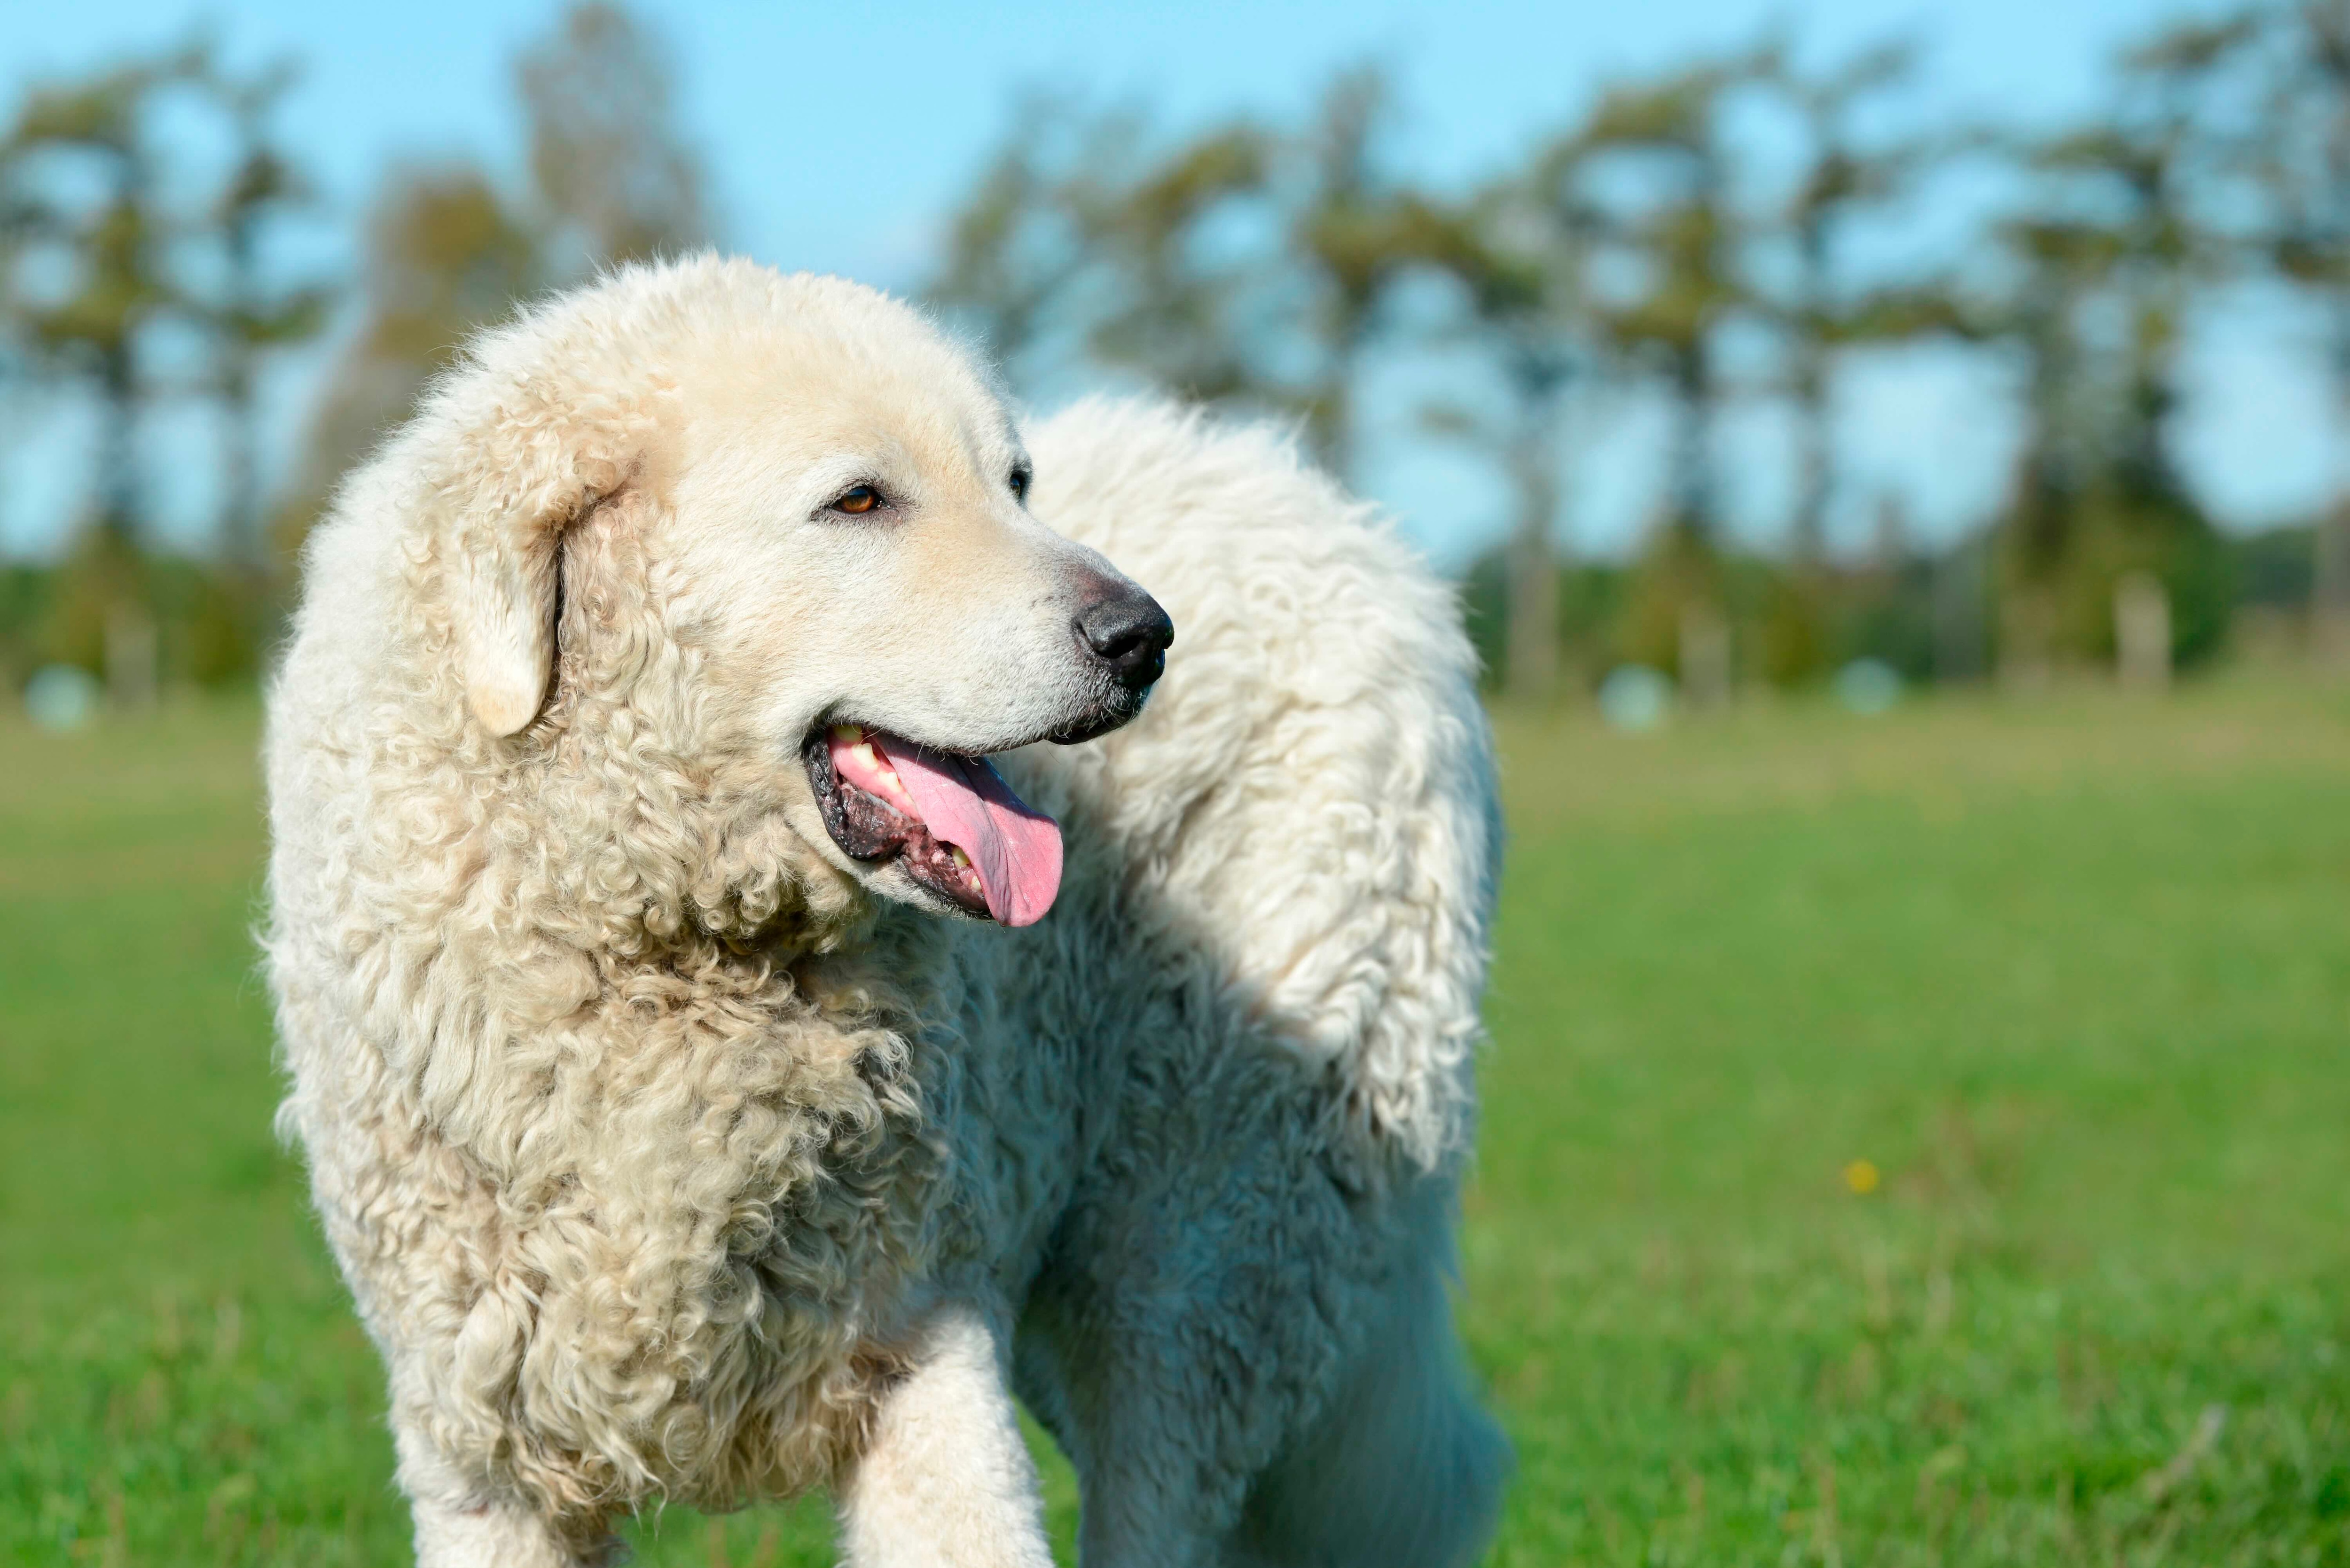 kuvasz with a white, curly coat standing in a field with shallow focus